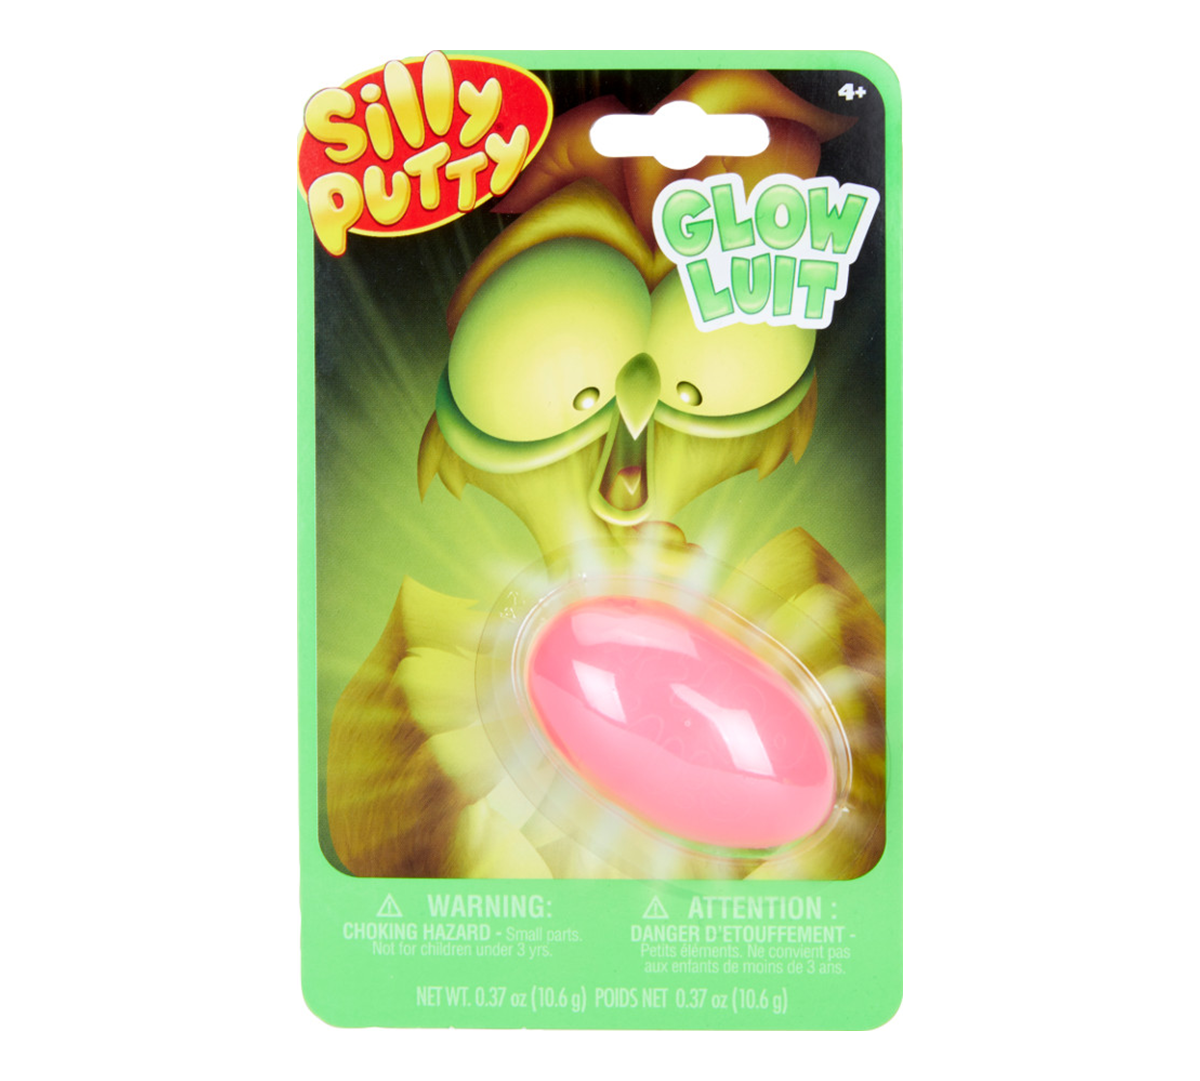 Crayola Bs080316 Silly Putty Glow in Dark Carded for sale online 